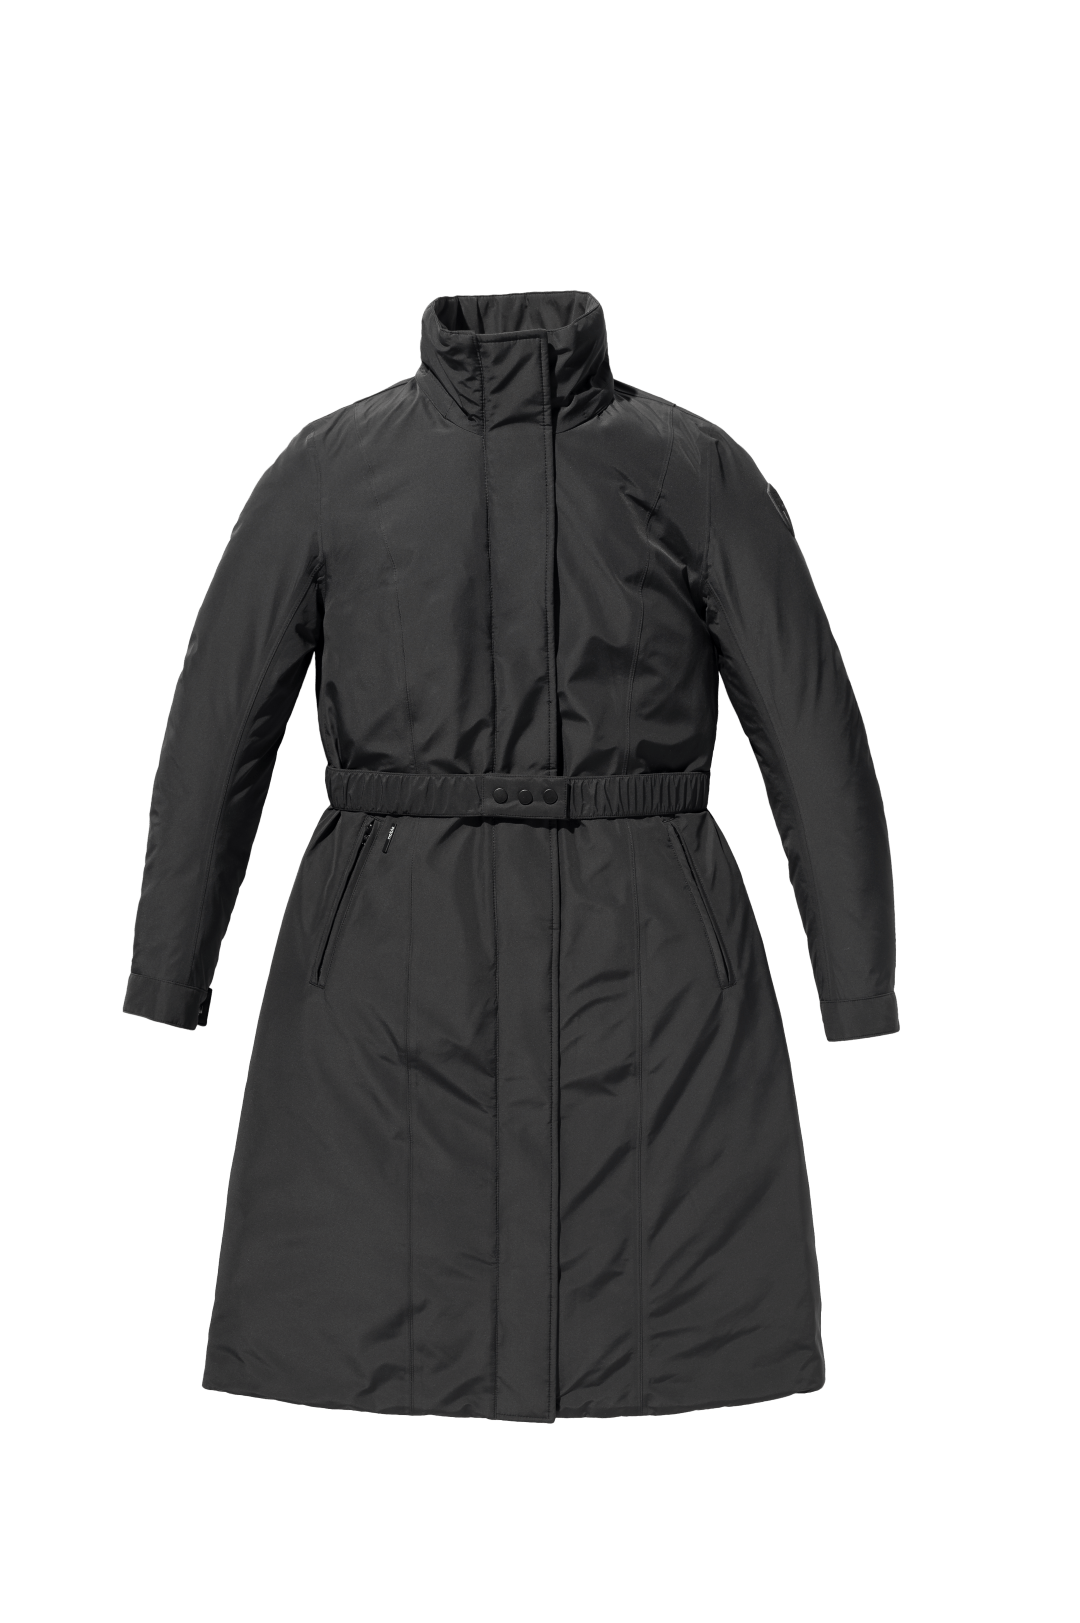 Celest Ladies Duster Parka in knee length, Canadian duck down insulation, removable hood and coyote fur trim, with adjustable belt, in Black